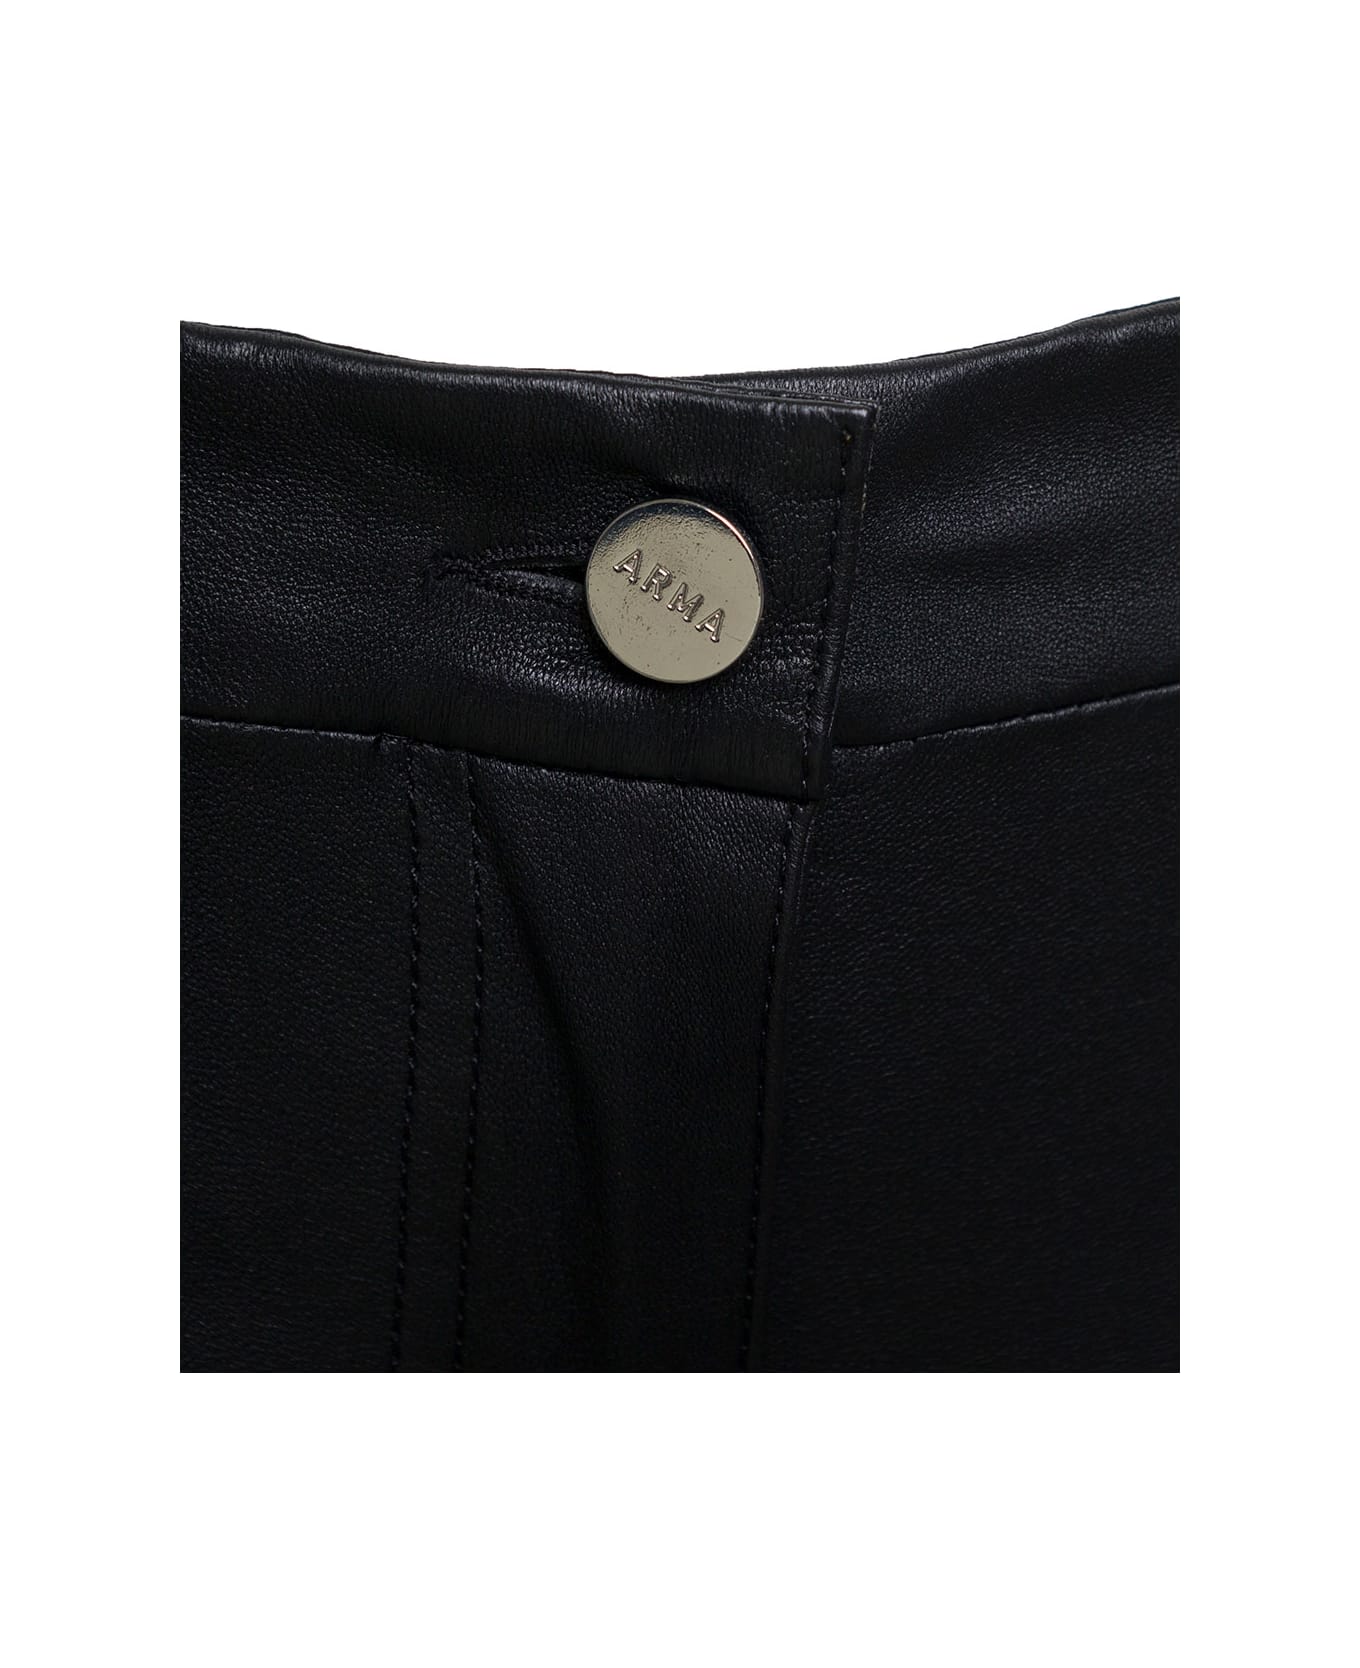 ARMA Black 'izzy' Pants With Branded Button Fastening In Leather Woman - Black